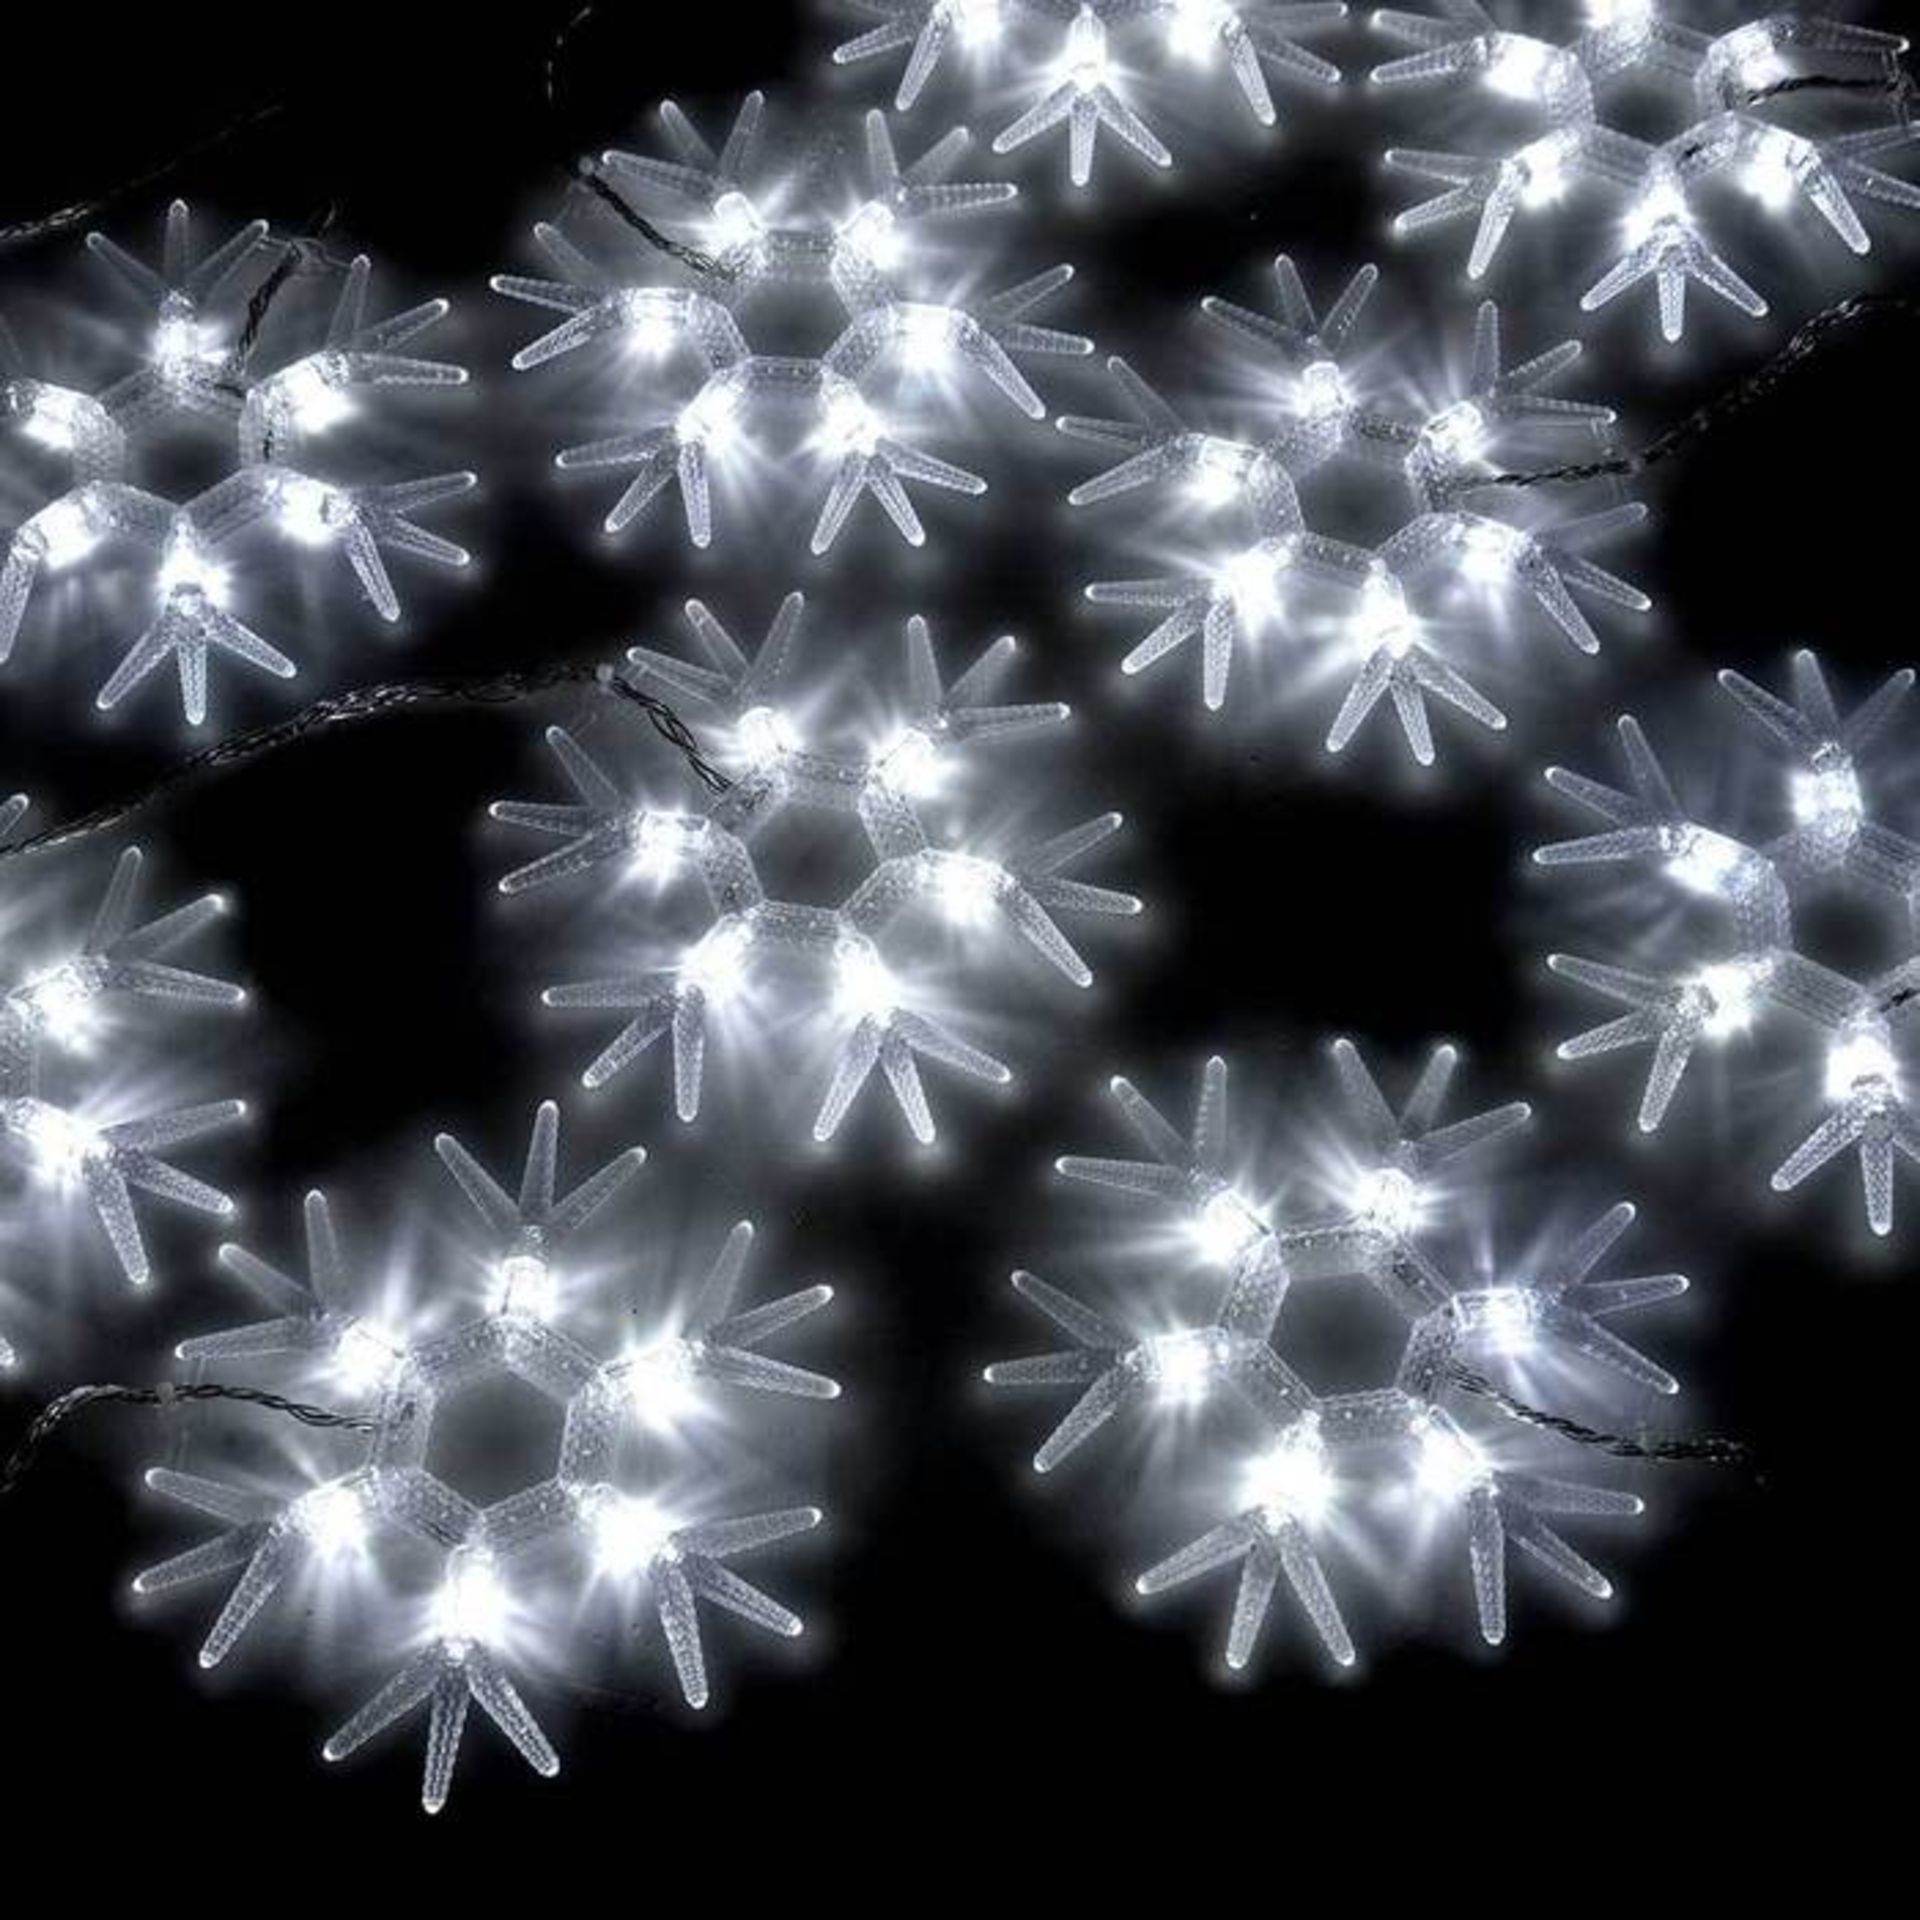 10 Acrylic Snowflakes with 60 Bright White LED Lights